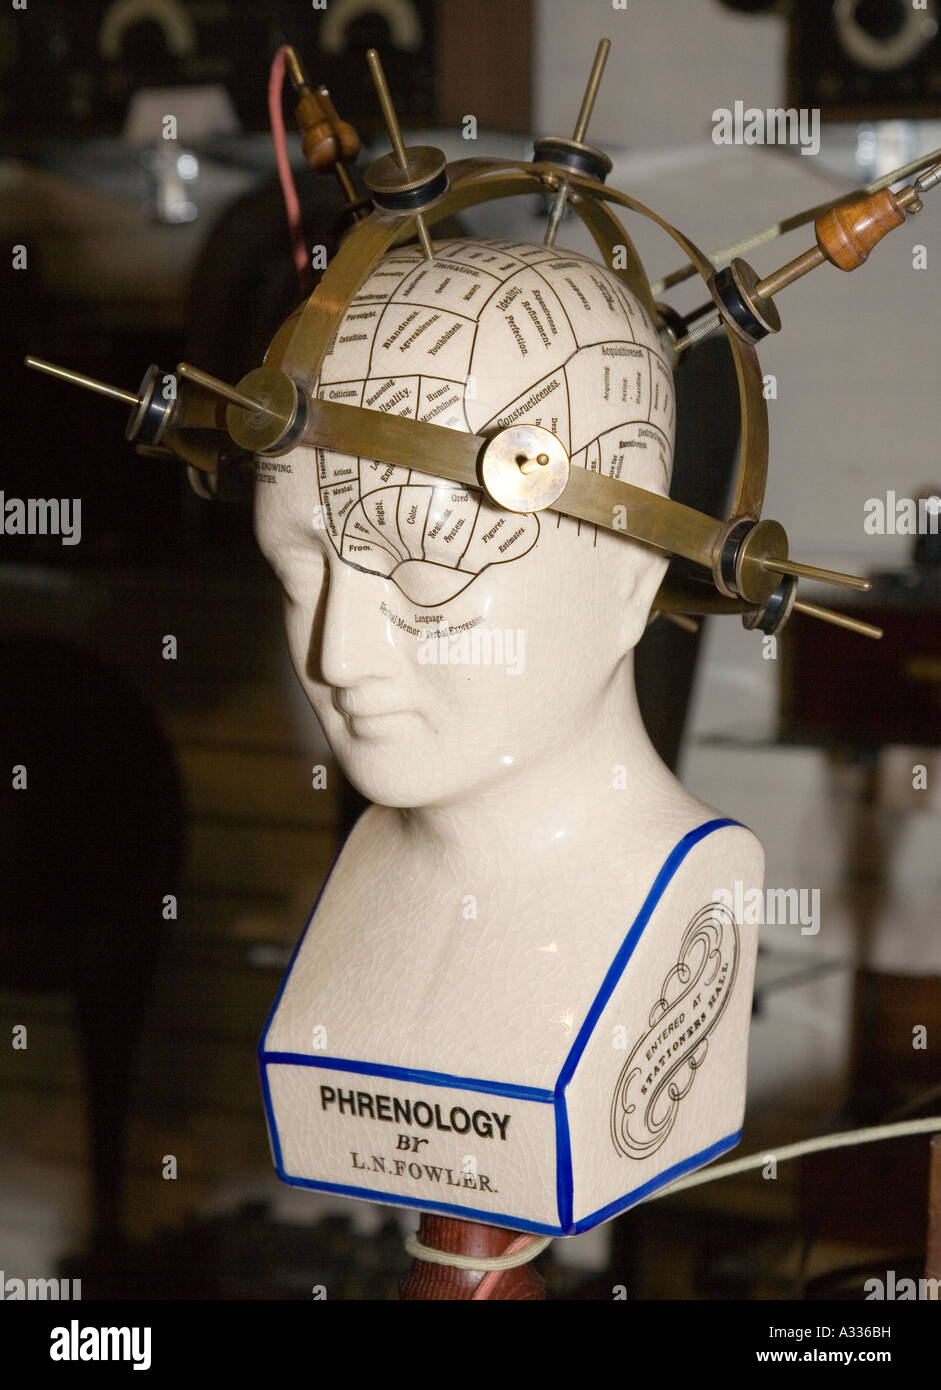 Apparatus used for phrenology measurements taken to determine bumps and shape of head and apply this to brain function Stock Photo